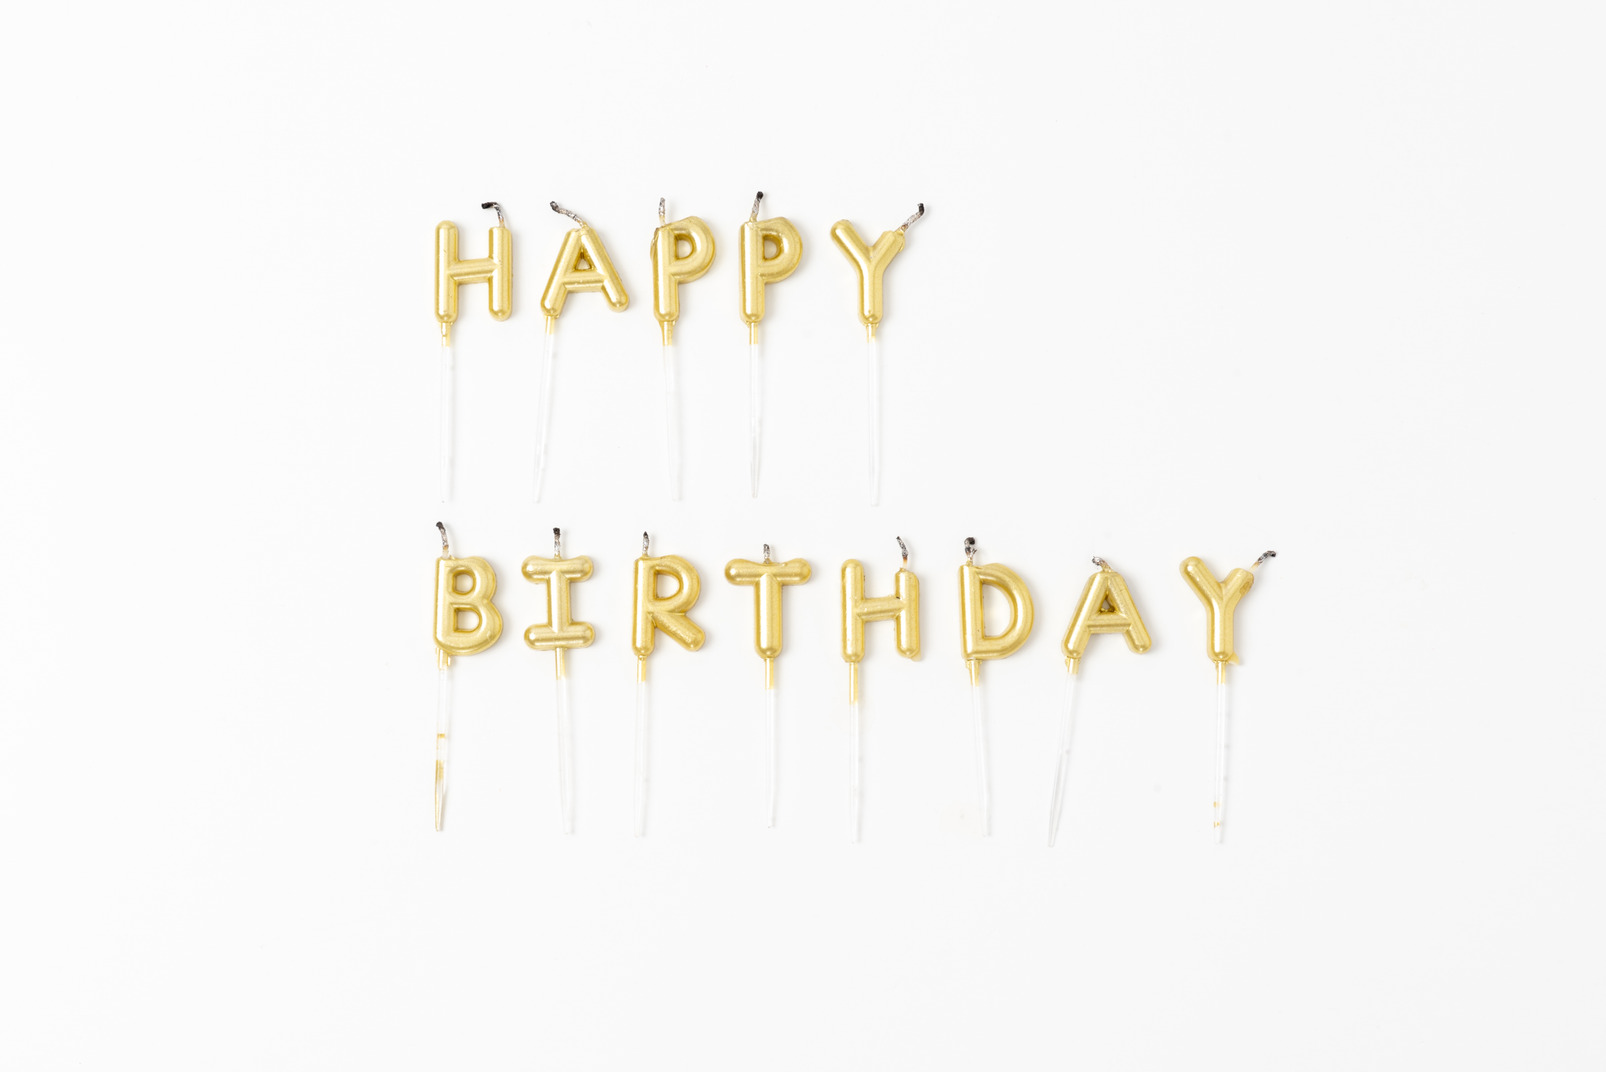 Golden letter candles on a white background